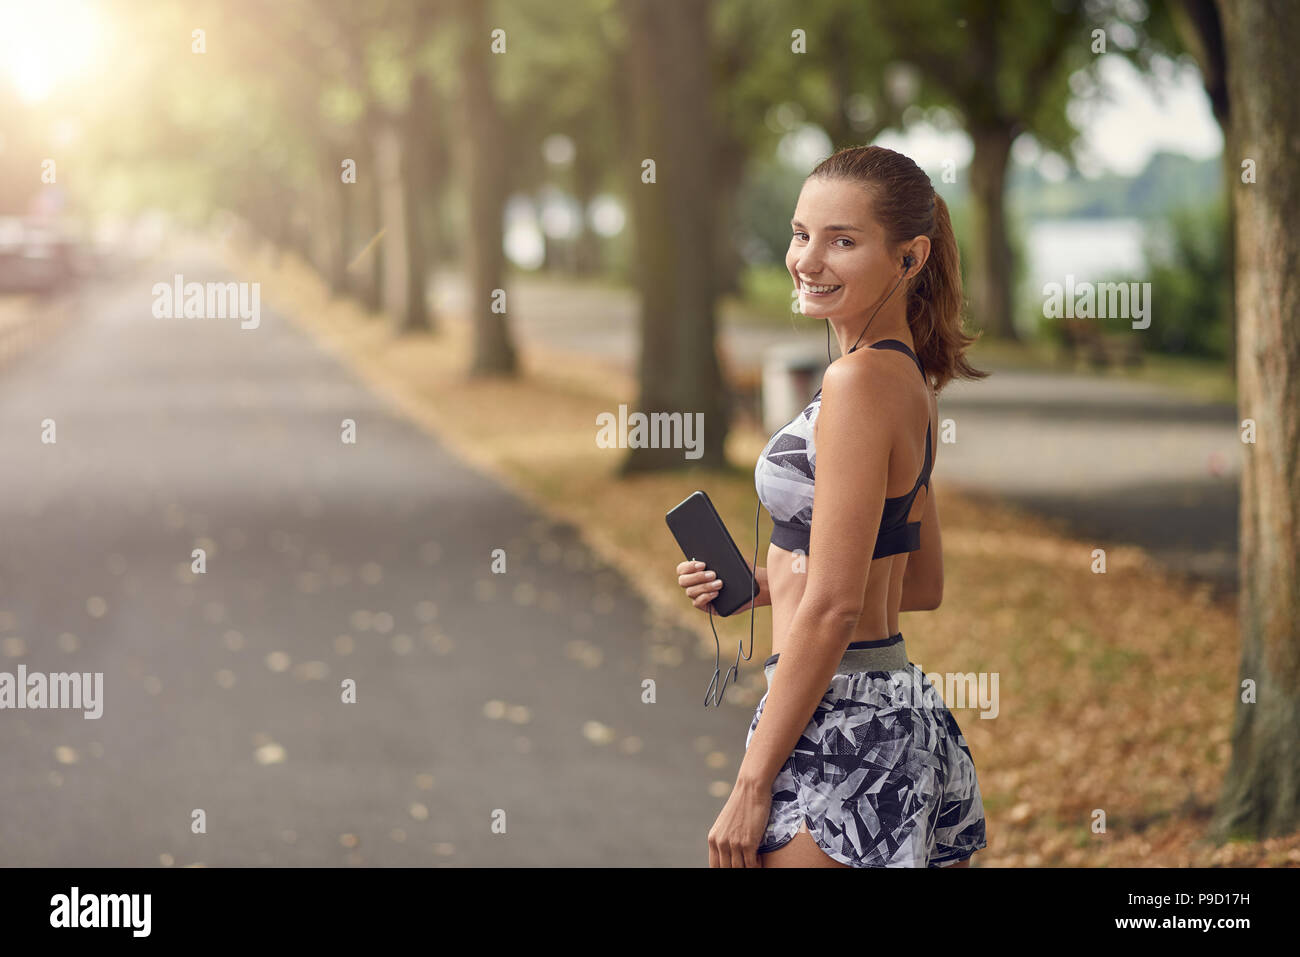 Attractive sporty woman listening to music on her mobile phone out jogging on a tree lined road turning to smile happily at the camera Stock Photo